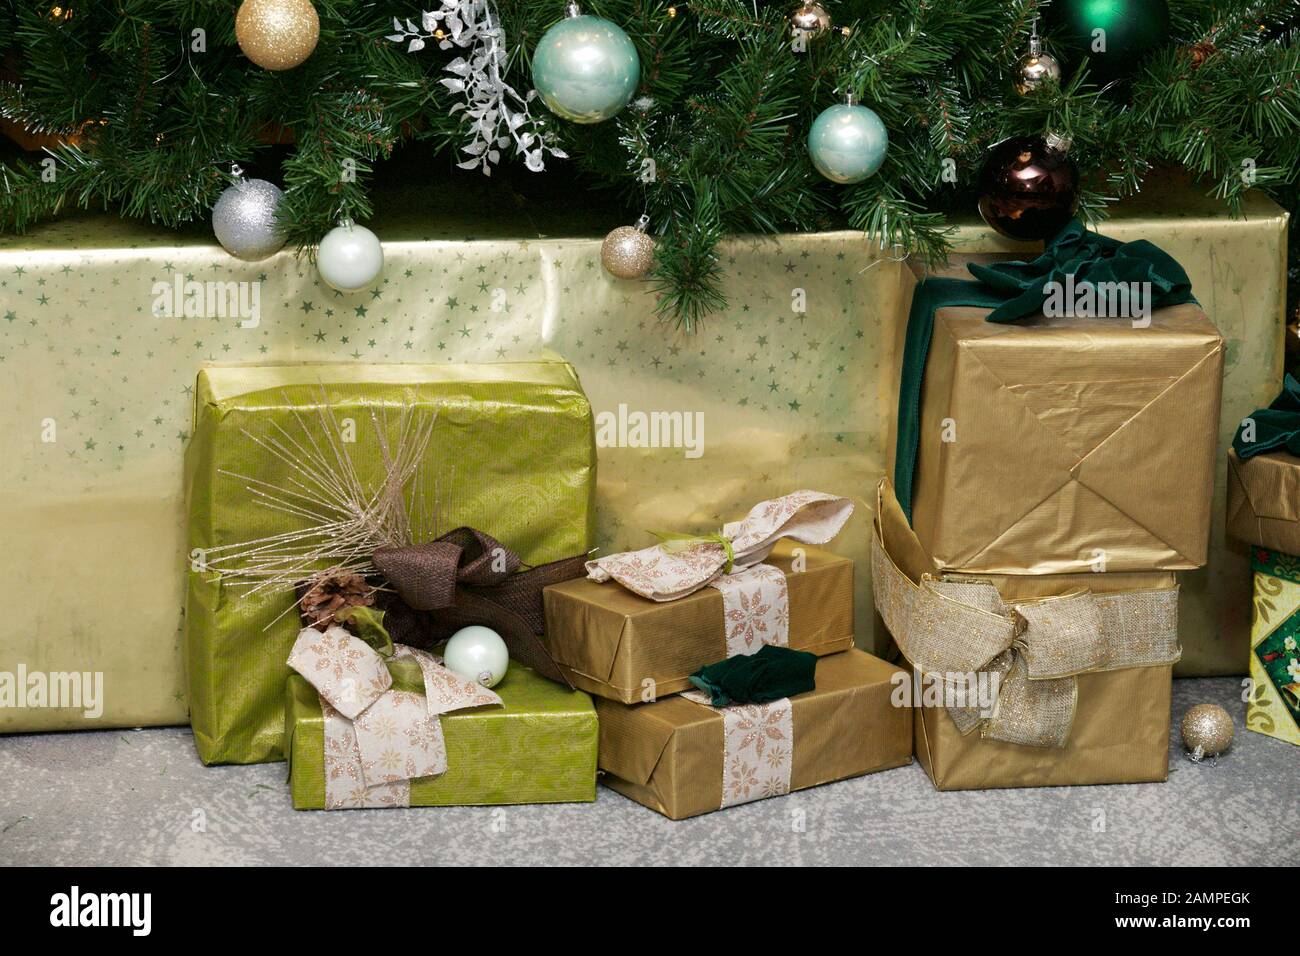 Christmas gifts under a Christmas tree. Stock Photo